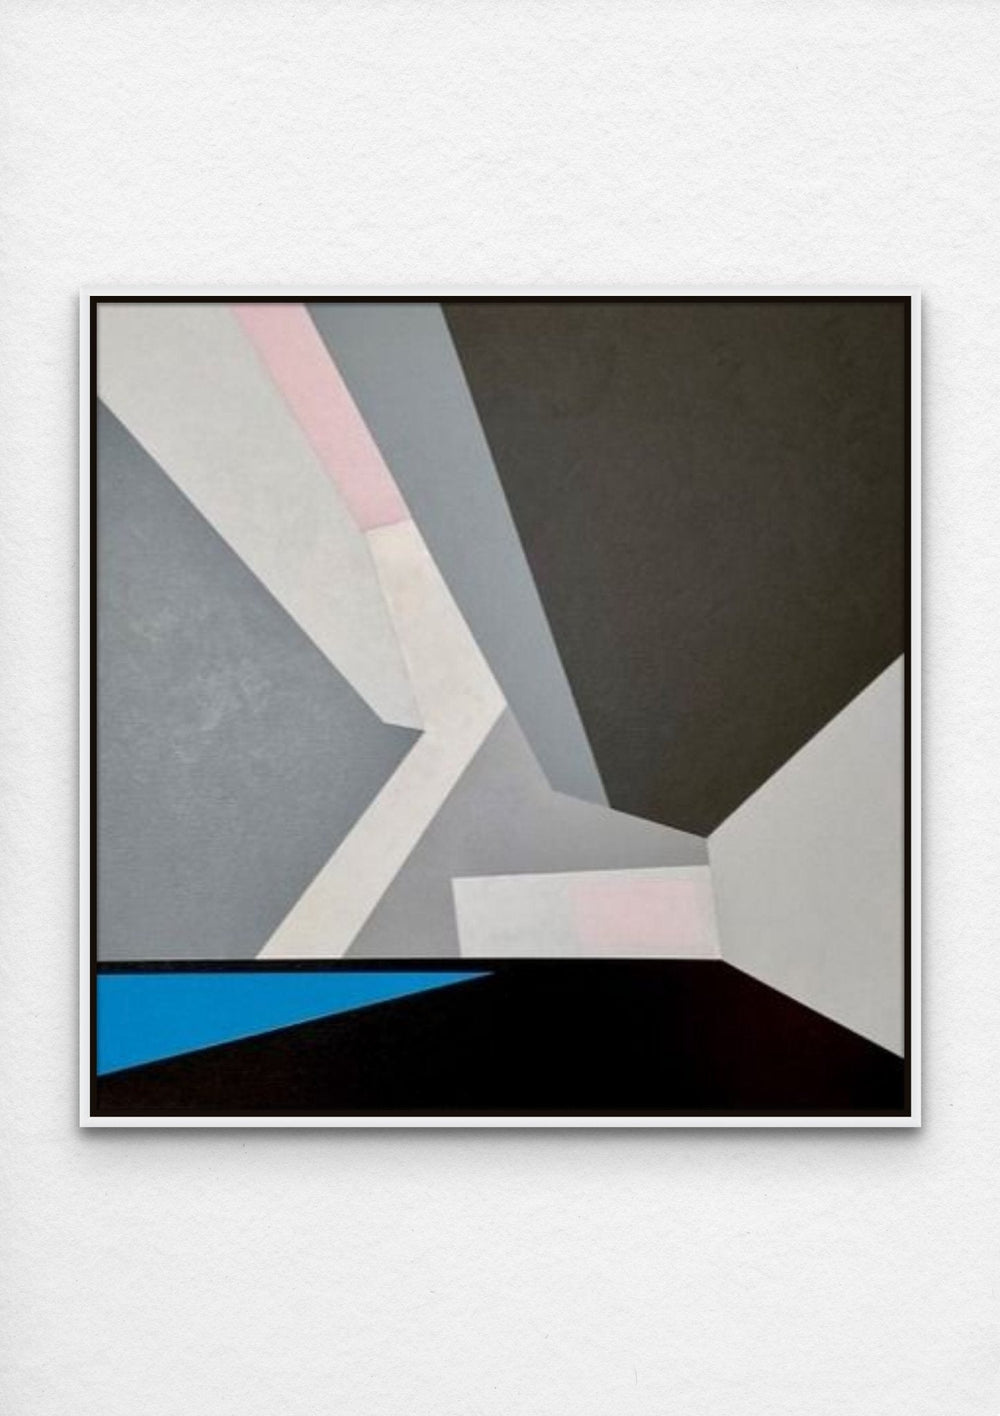 Minimalist original artwork utilizing perspective and a neutral palette by Lars Jerlach